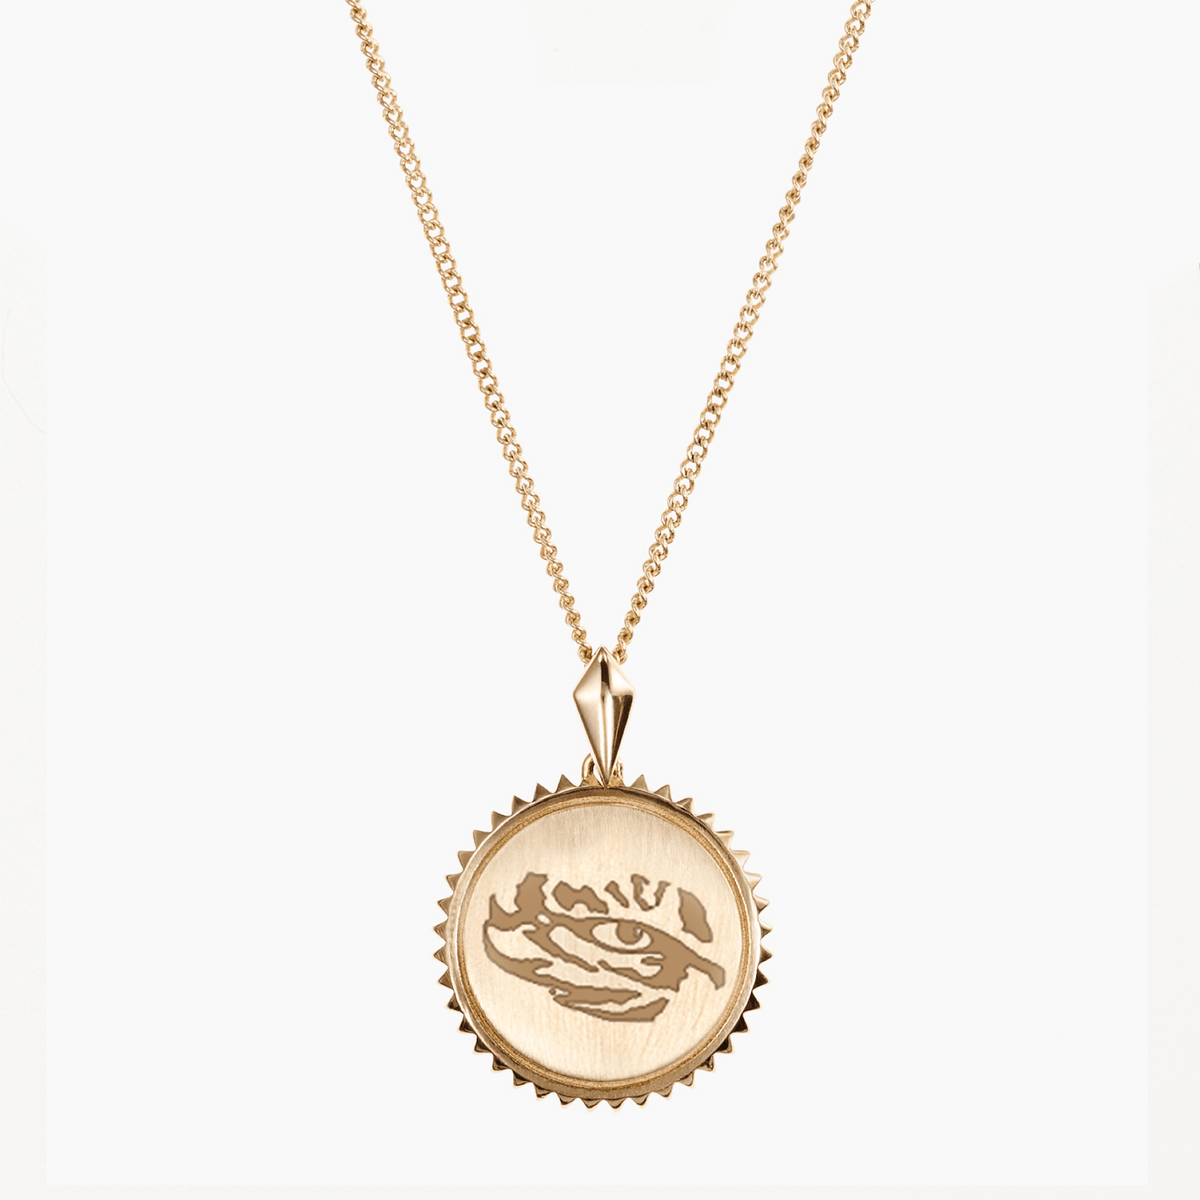 LSU Sunburst Tiger Necklace with Cable Chain